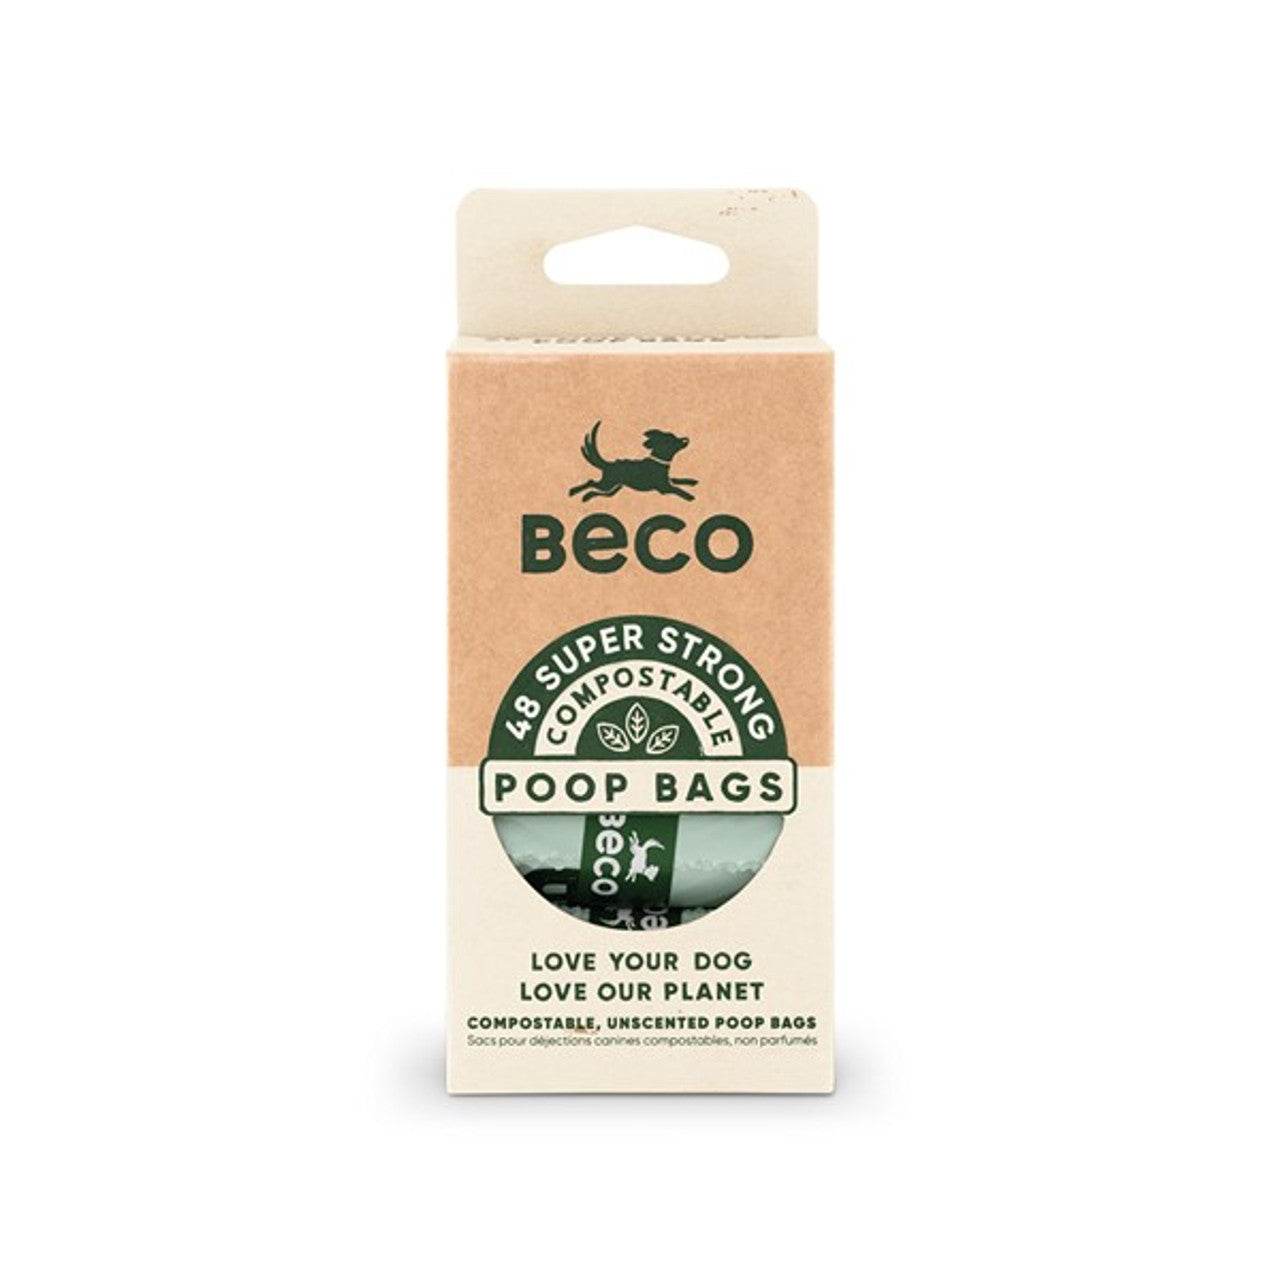 Compostable Poop Bags Unscented